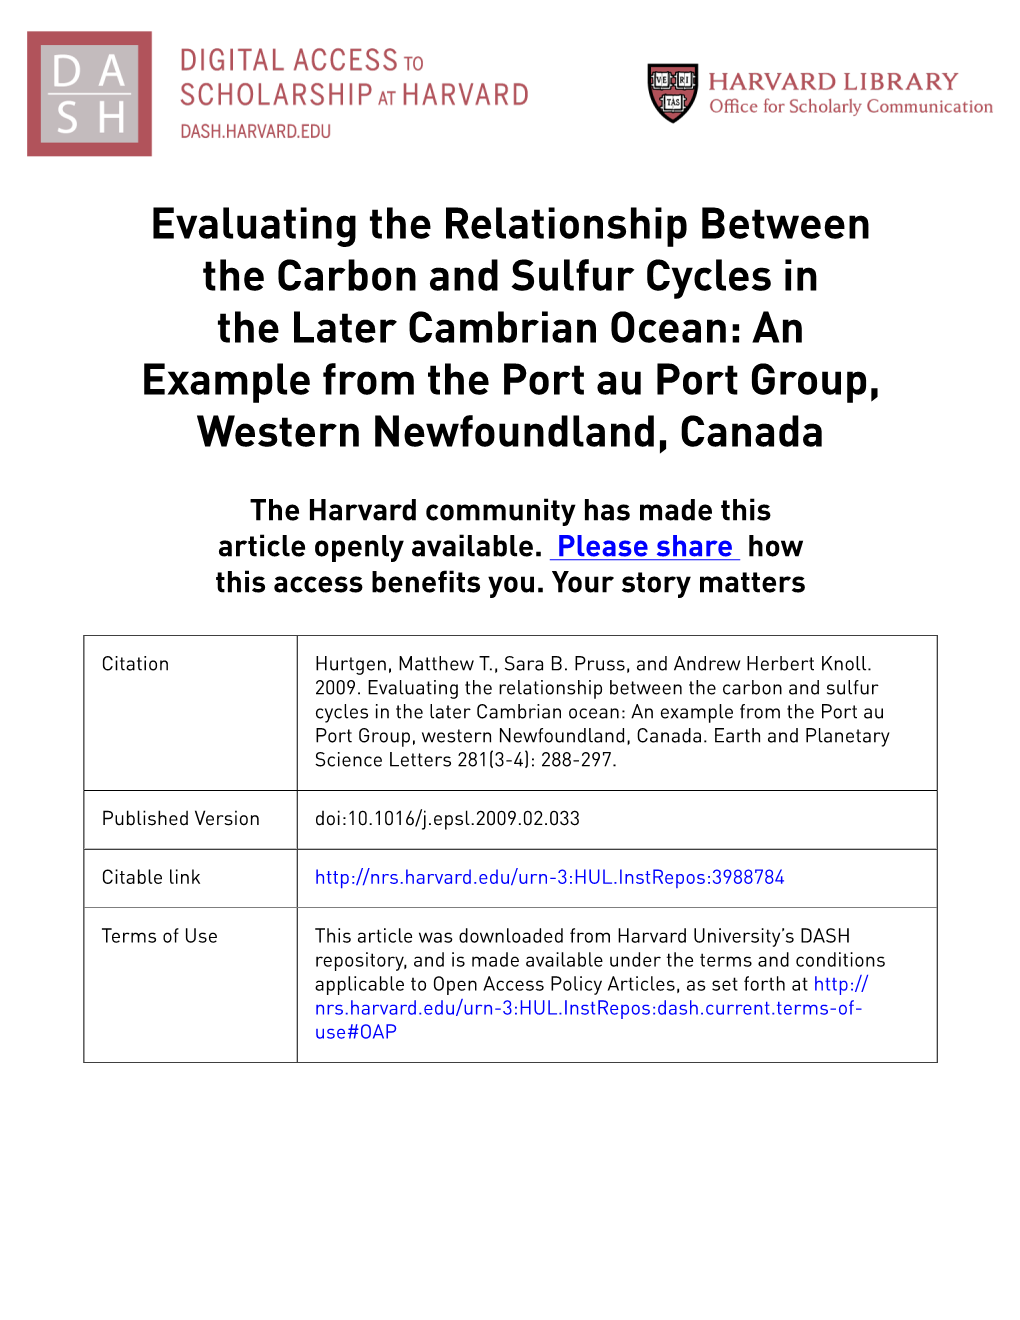 Evaluating the Relationship Between the Carbon and Sulfur Cycles in the Later Cambrian Ocean: an Example from the Port Au Port Group, Western Newfoundland, Canada